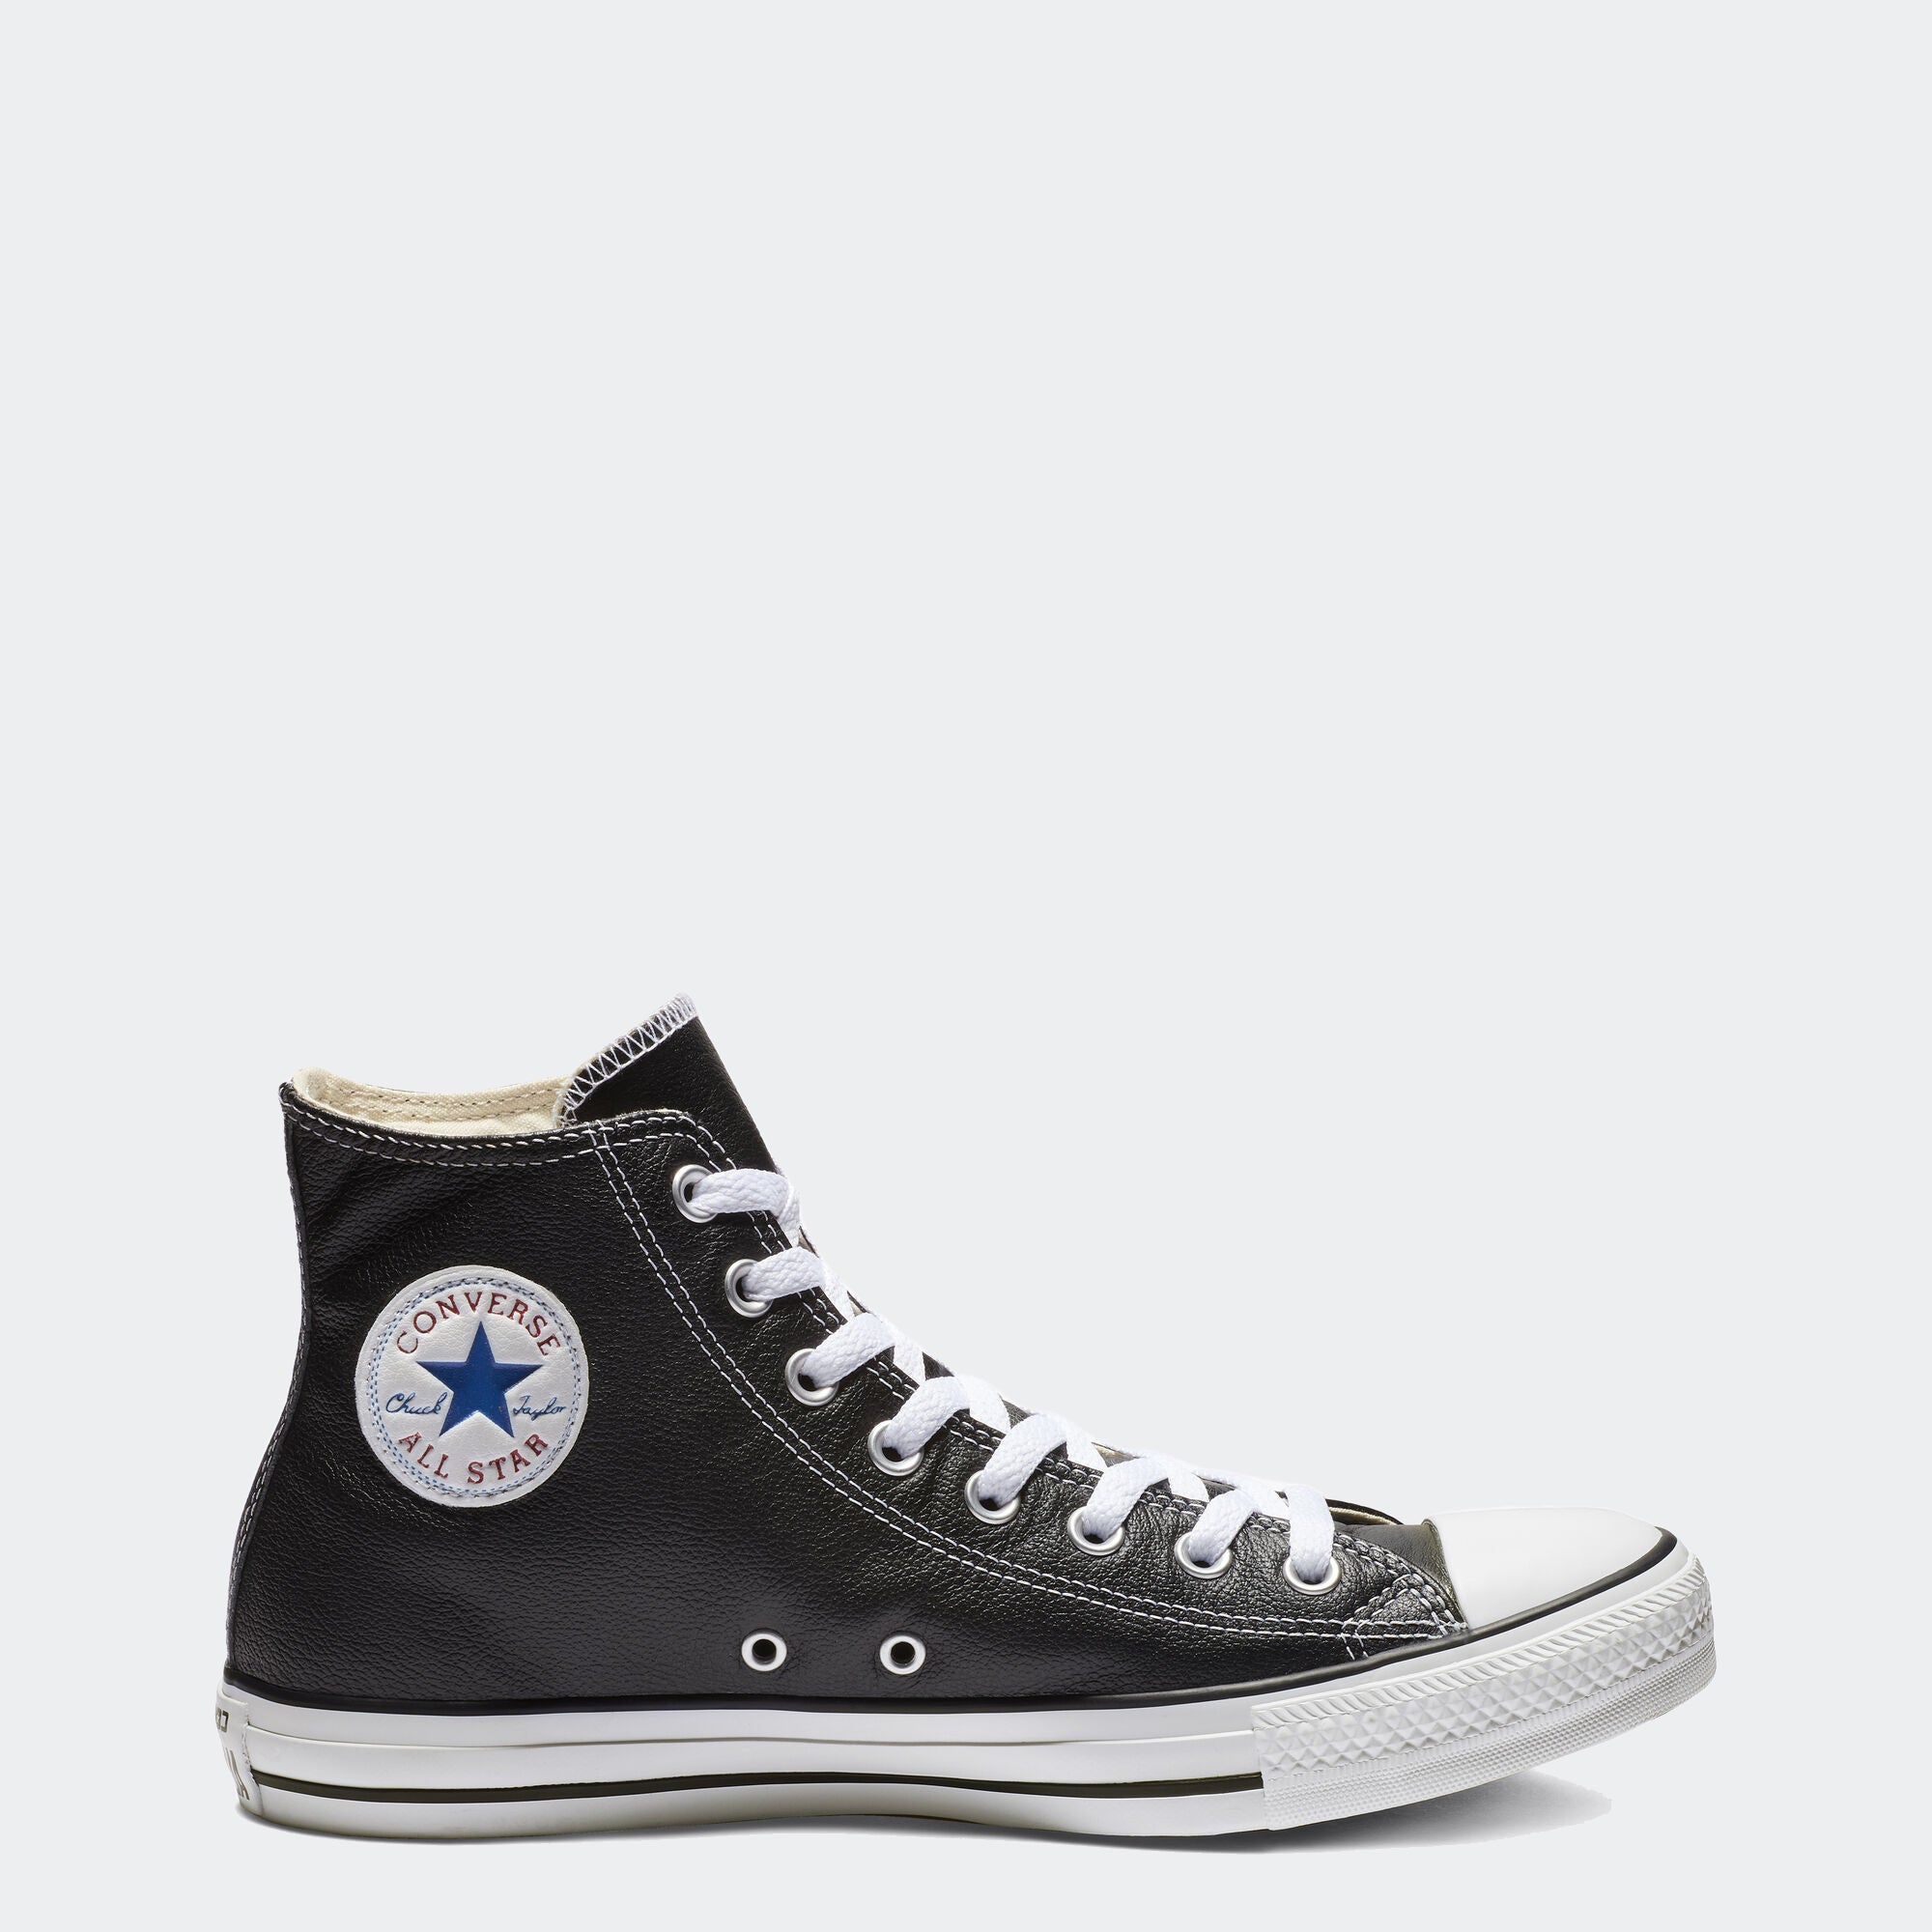 Converse Chuck Taylor Star Leather Hi Shoes | Chicago City